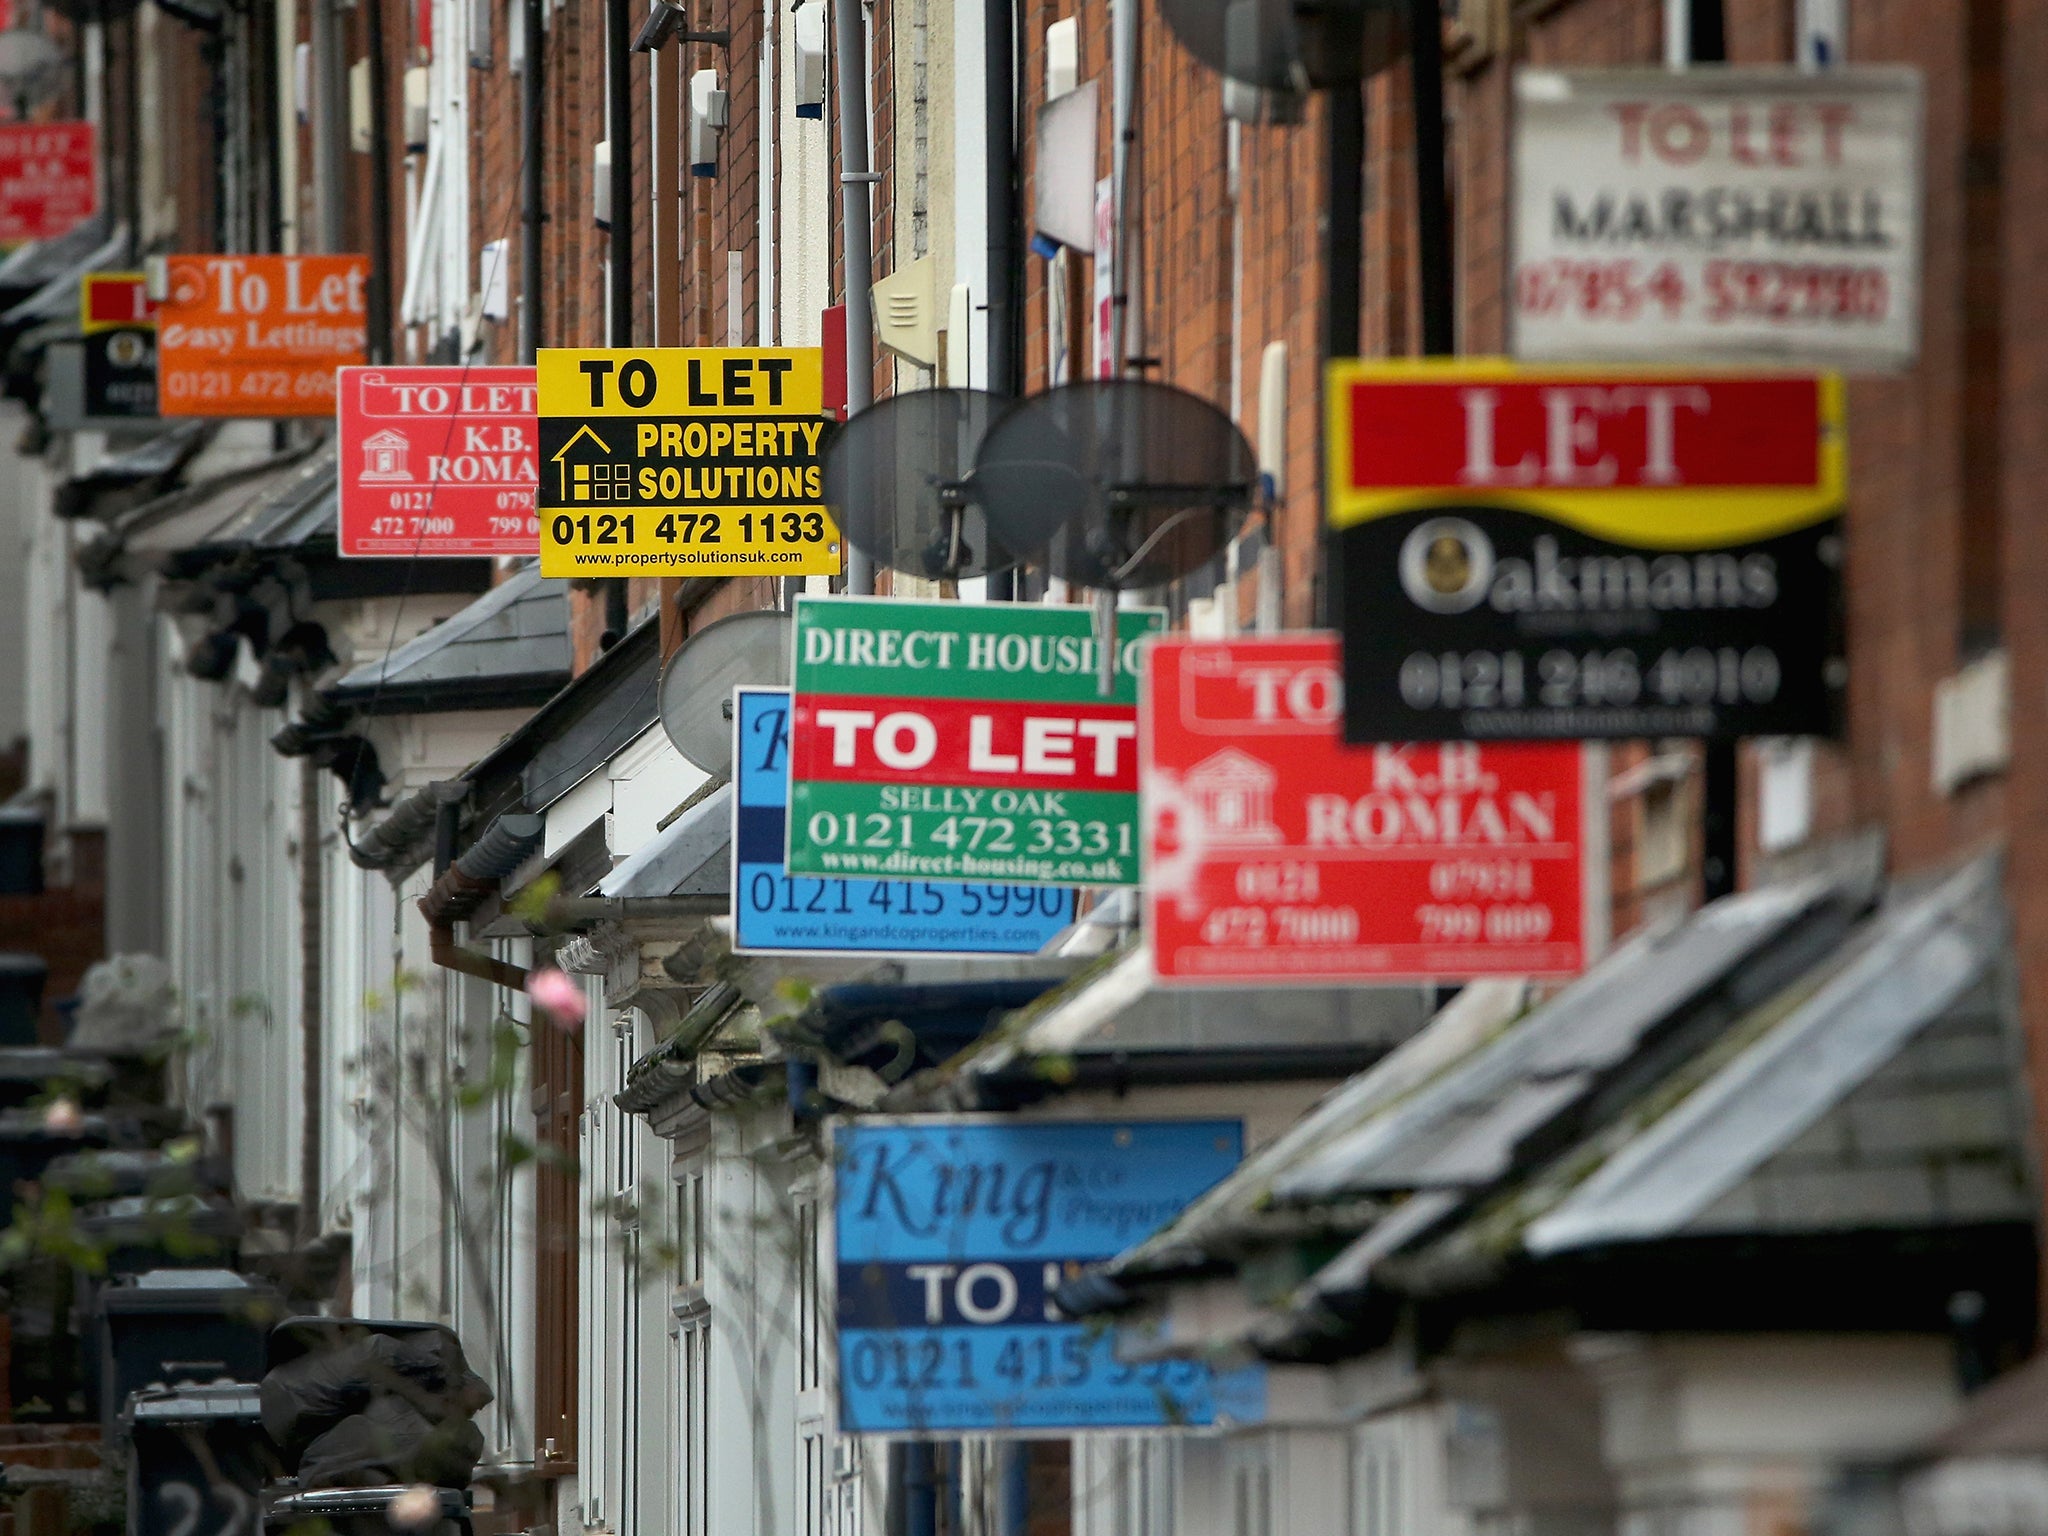 The Help to Rent scheme would be a key Lib Dem demand in any post-election negotiations on another coalition